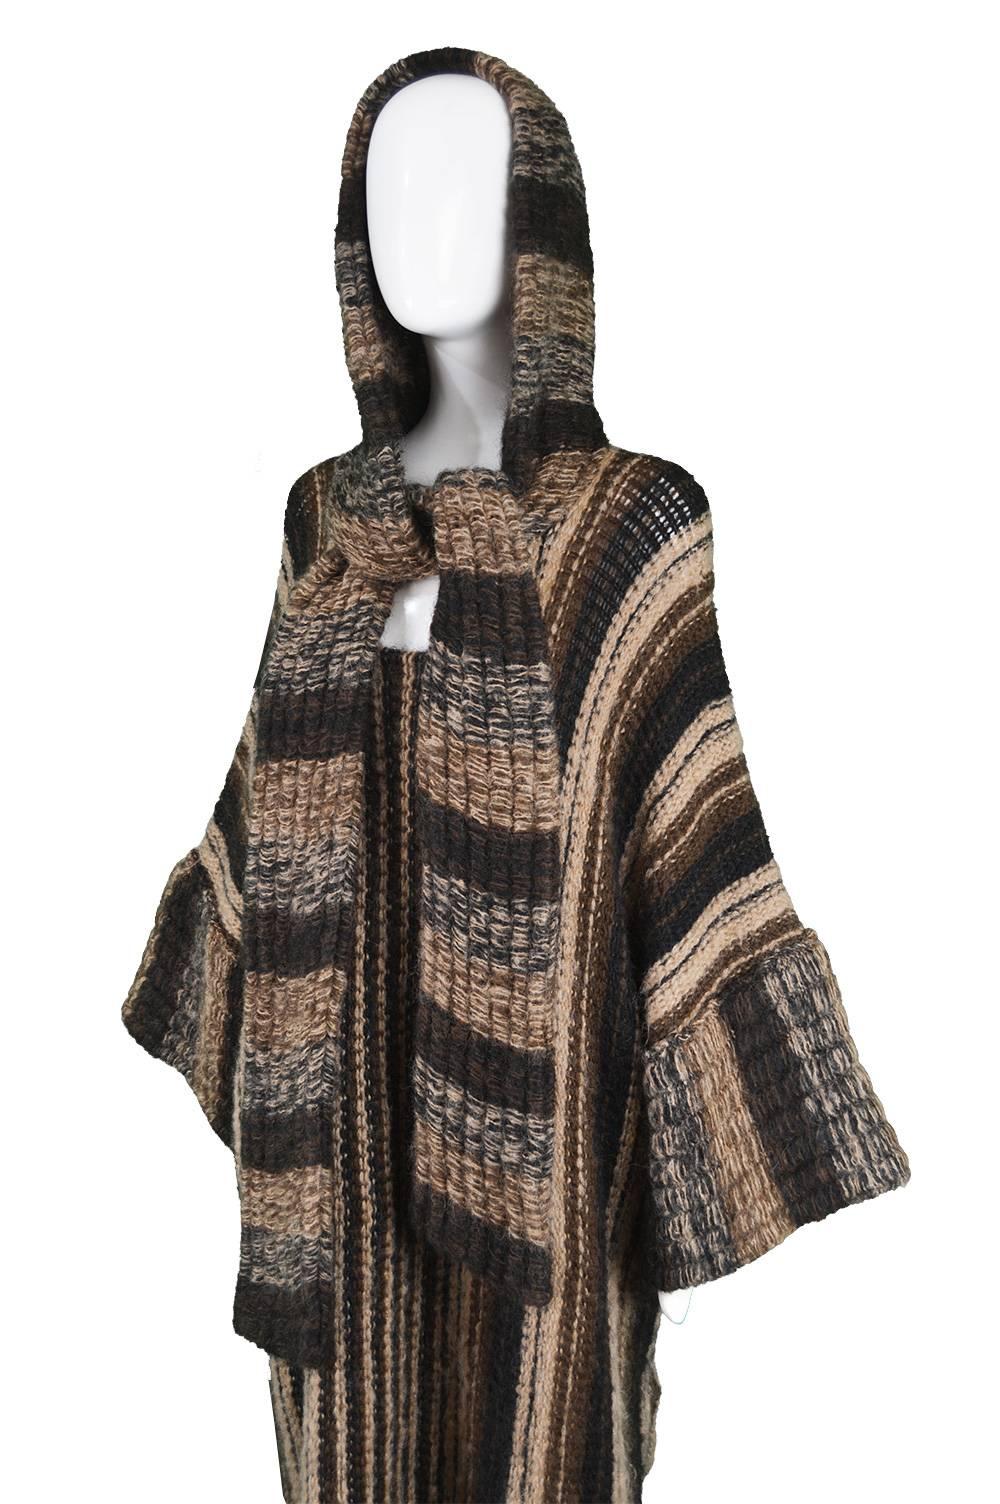 Women's Mary Quant Vintage Brown Avant Garde Knit Poncho Dress with Attached Scarf, 1970